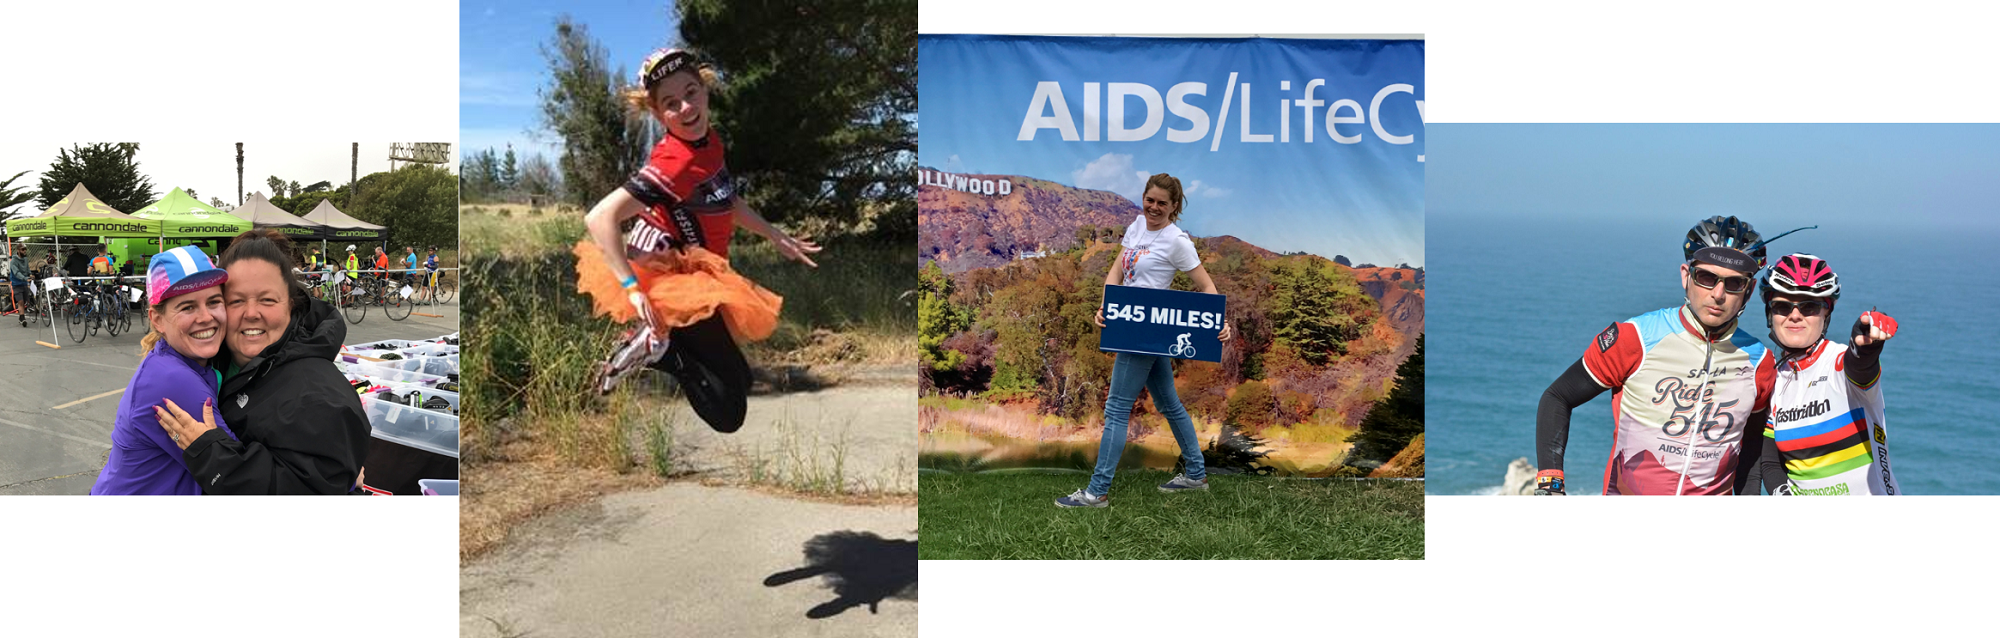 From a stop in Bradley, CA where we raise 58K, to a fun "Red Dress" day,  follow by the goal achieved at Fairfax High School in LA with the miles completed -  Next year we are hoping for more HPE employees to join - YOU CAN DO IT!